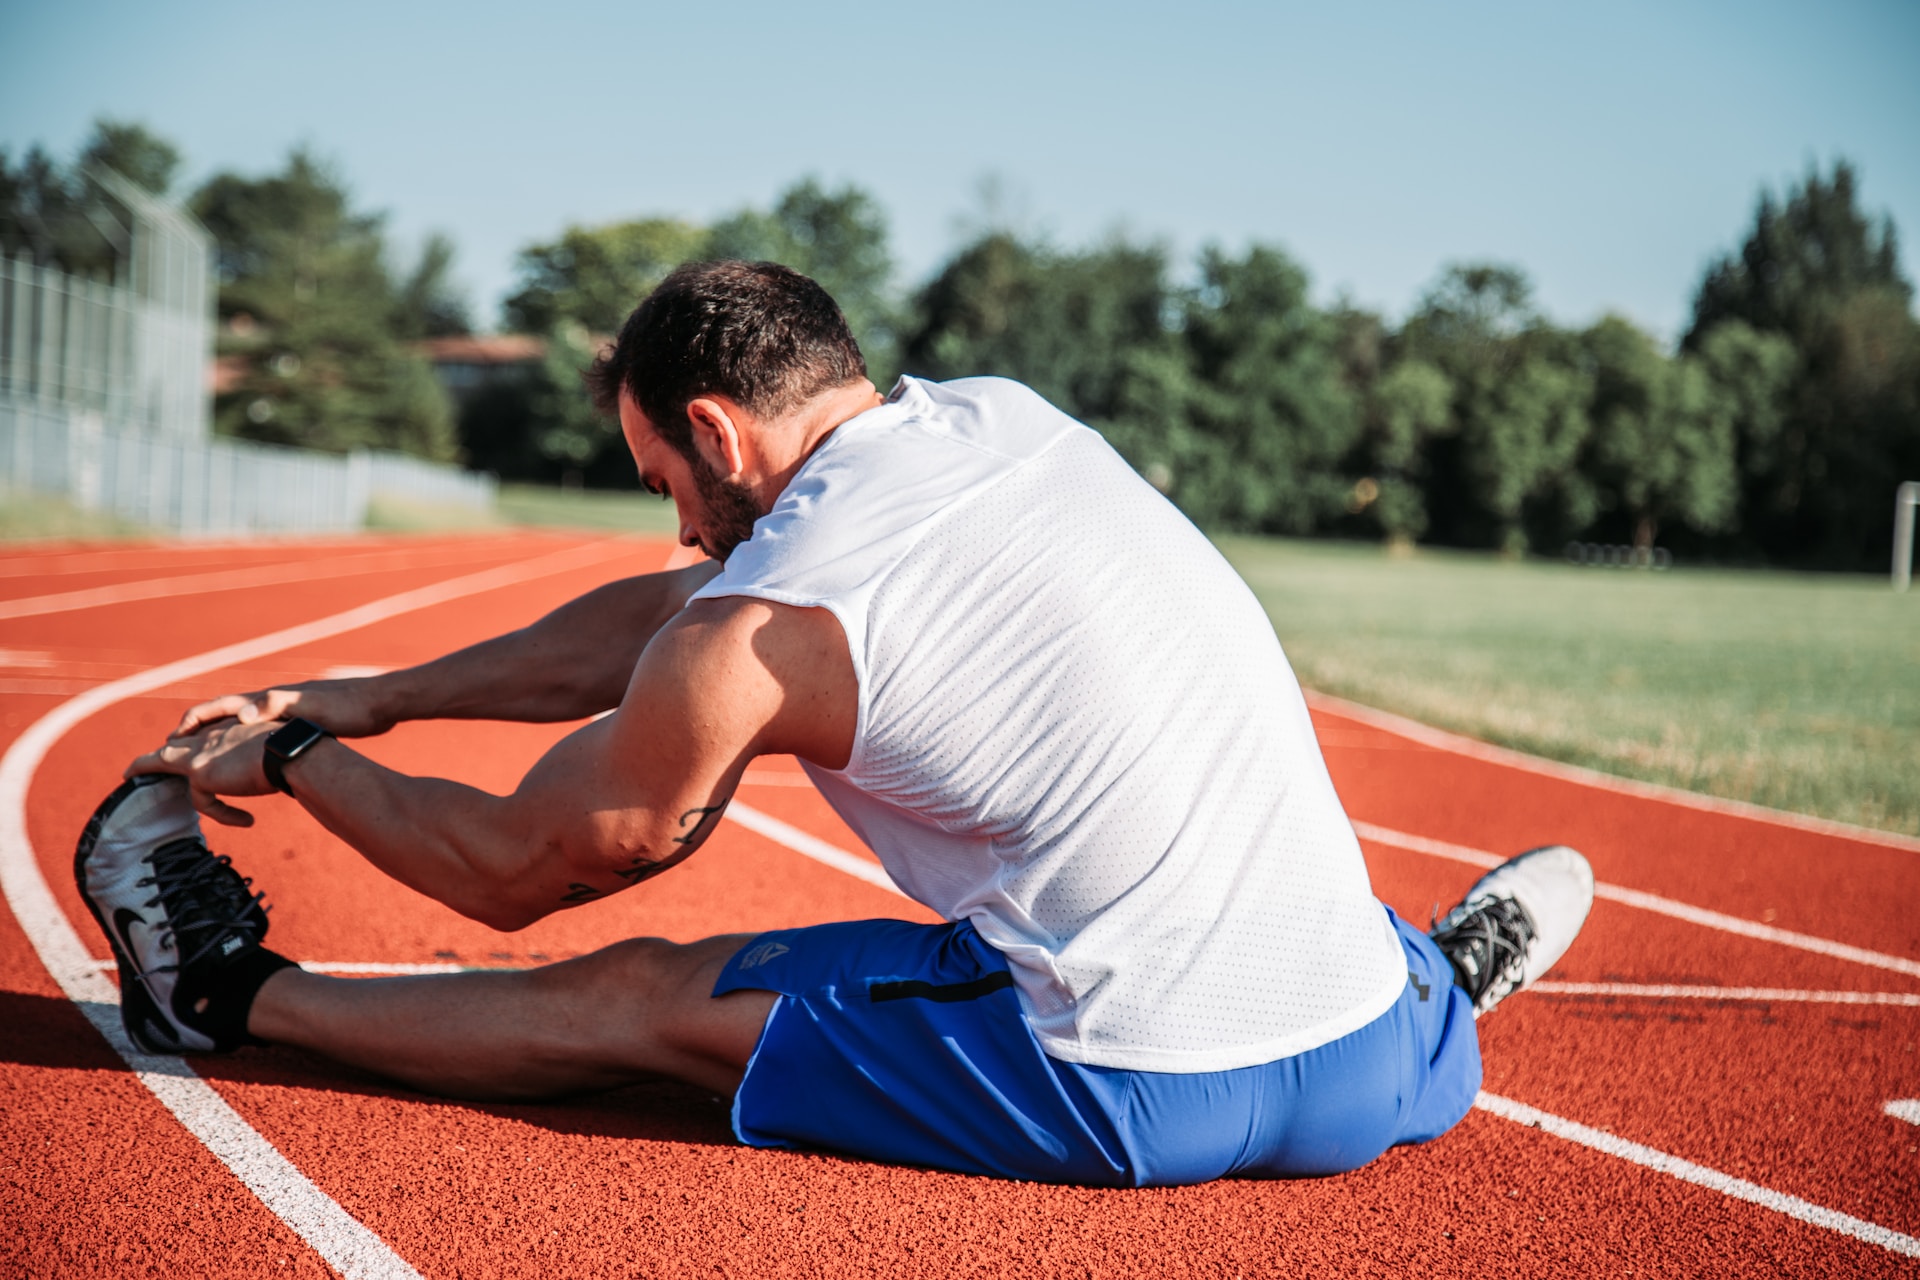 the image shows a sportsman doing stretching at the sports ground